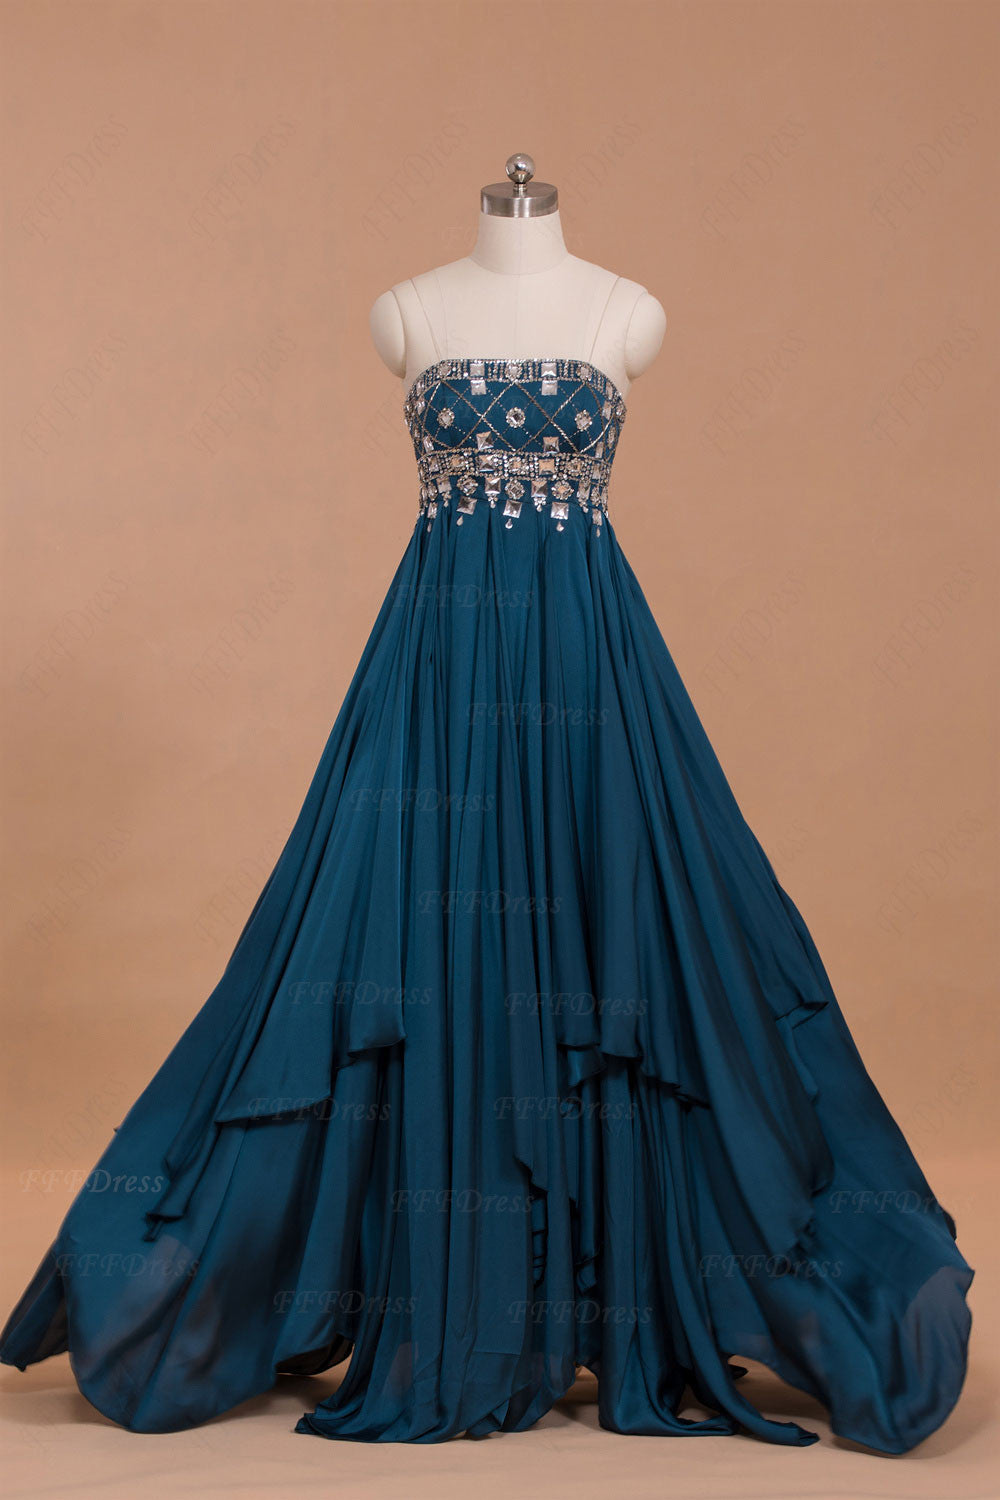 Teal Crystal prom dresses long with overlays